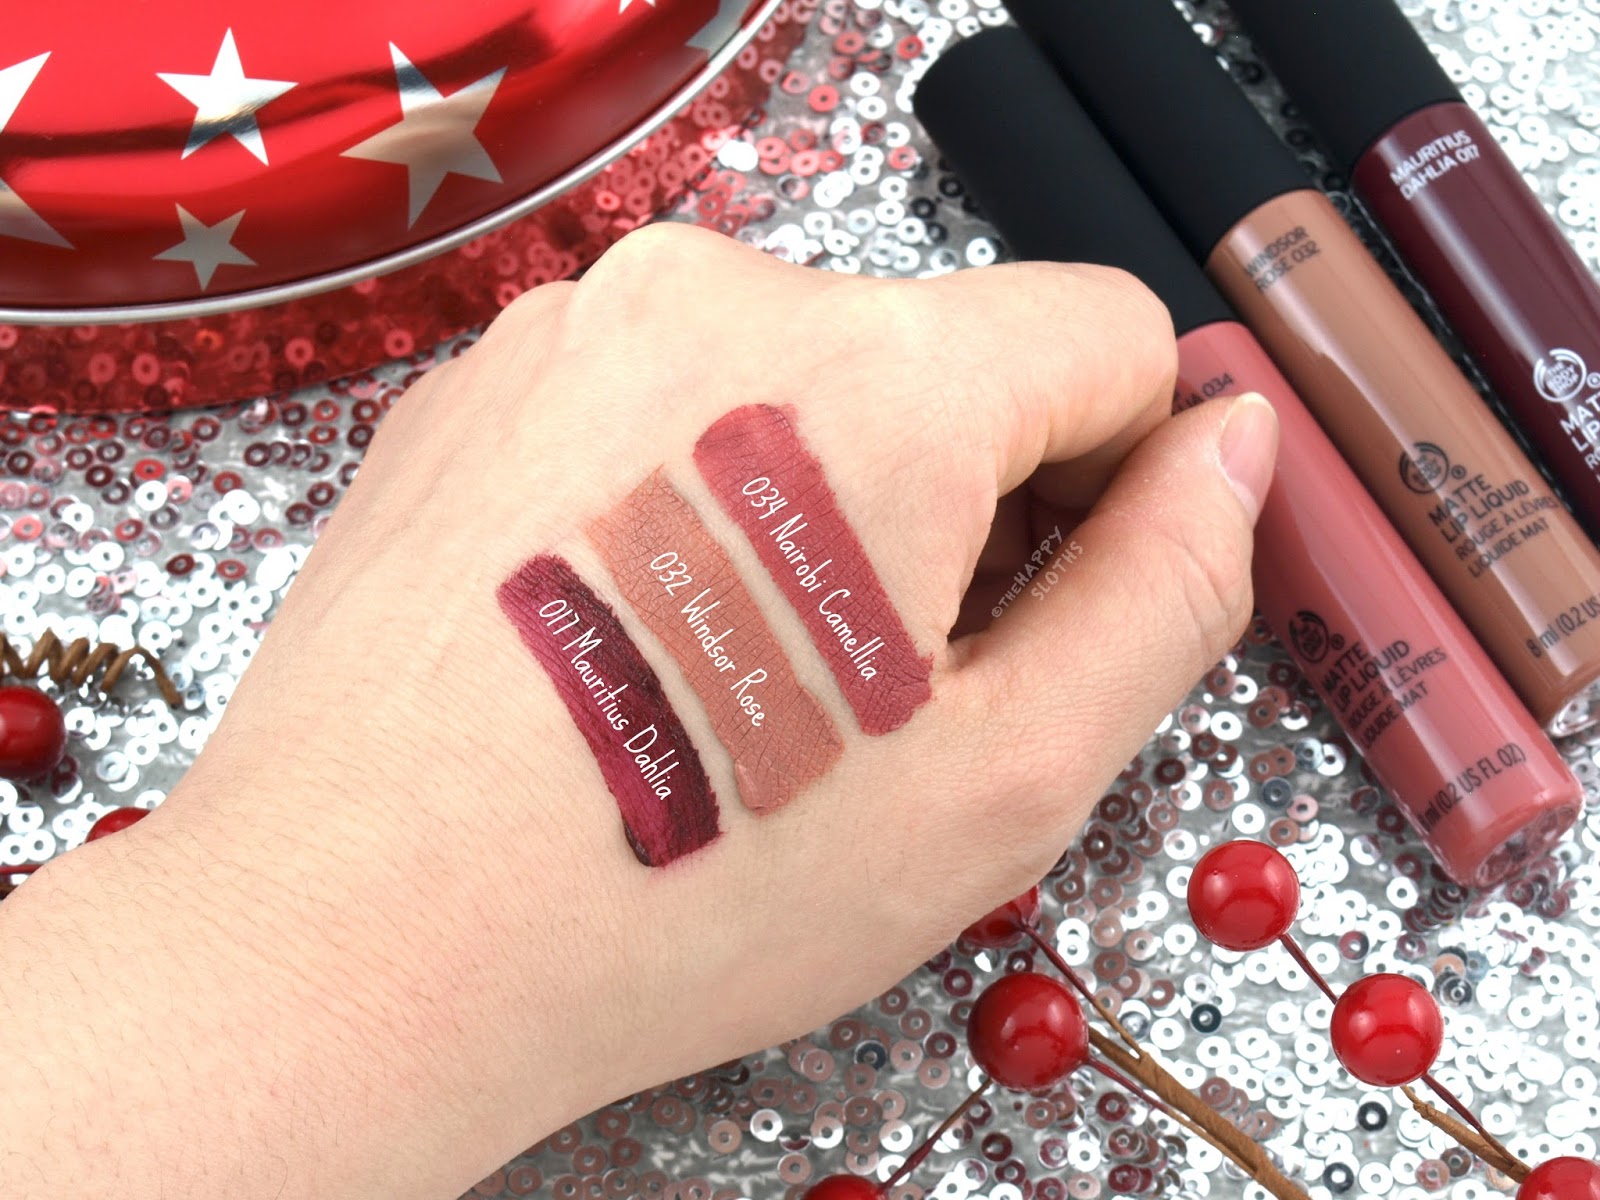 Vermaken Bully Kritiek The Body Shop x House of Holland Limited Edition Matte Lip Liquid  Collection: Review and Swatches | The Happy Sloths: Beauty, Makeup, and  Skincare Blog with Reviews and Swatches